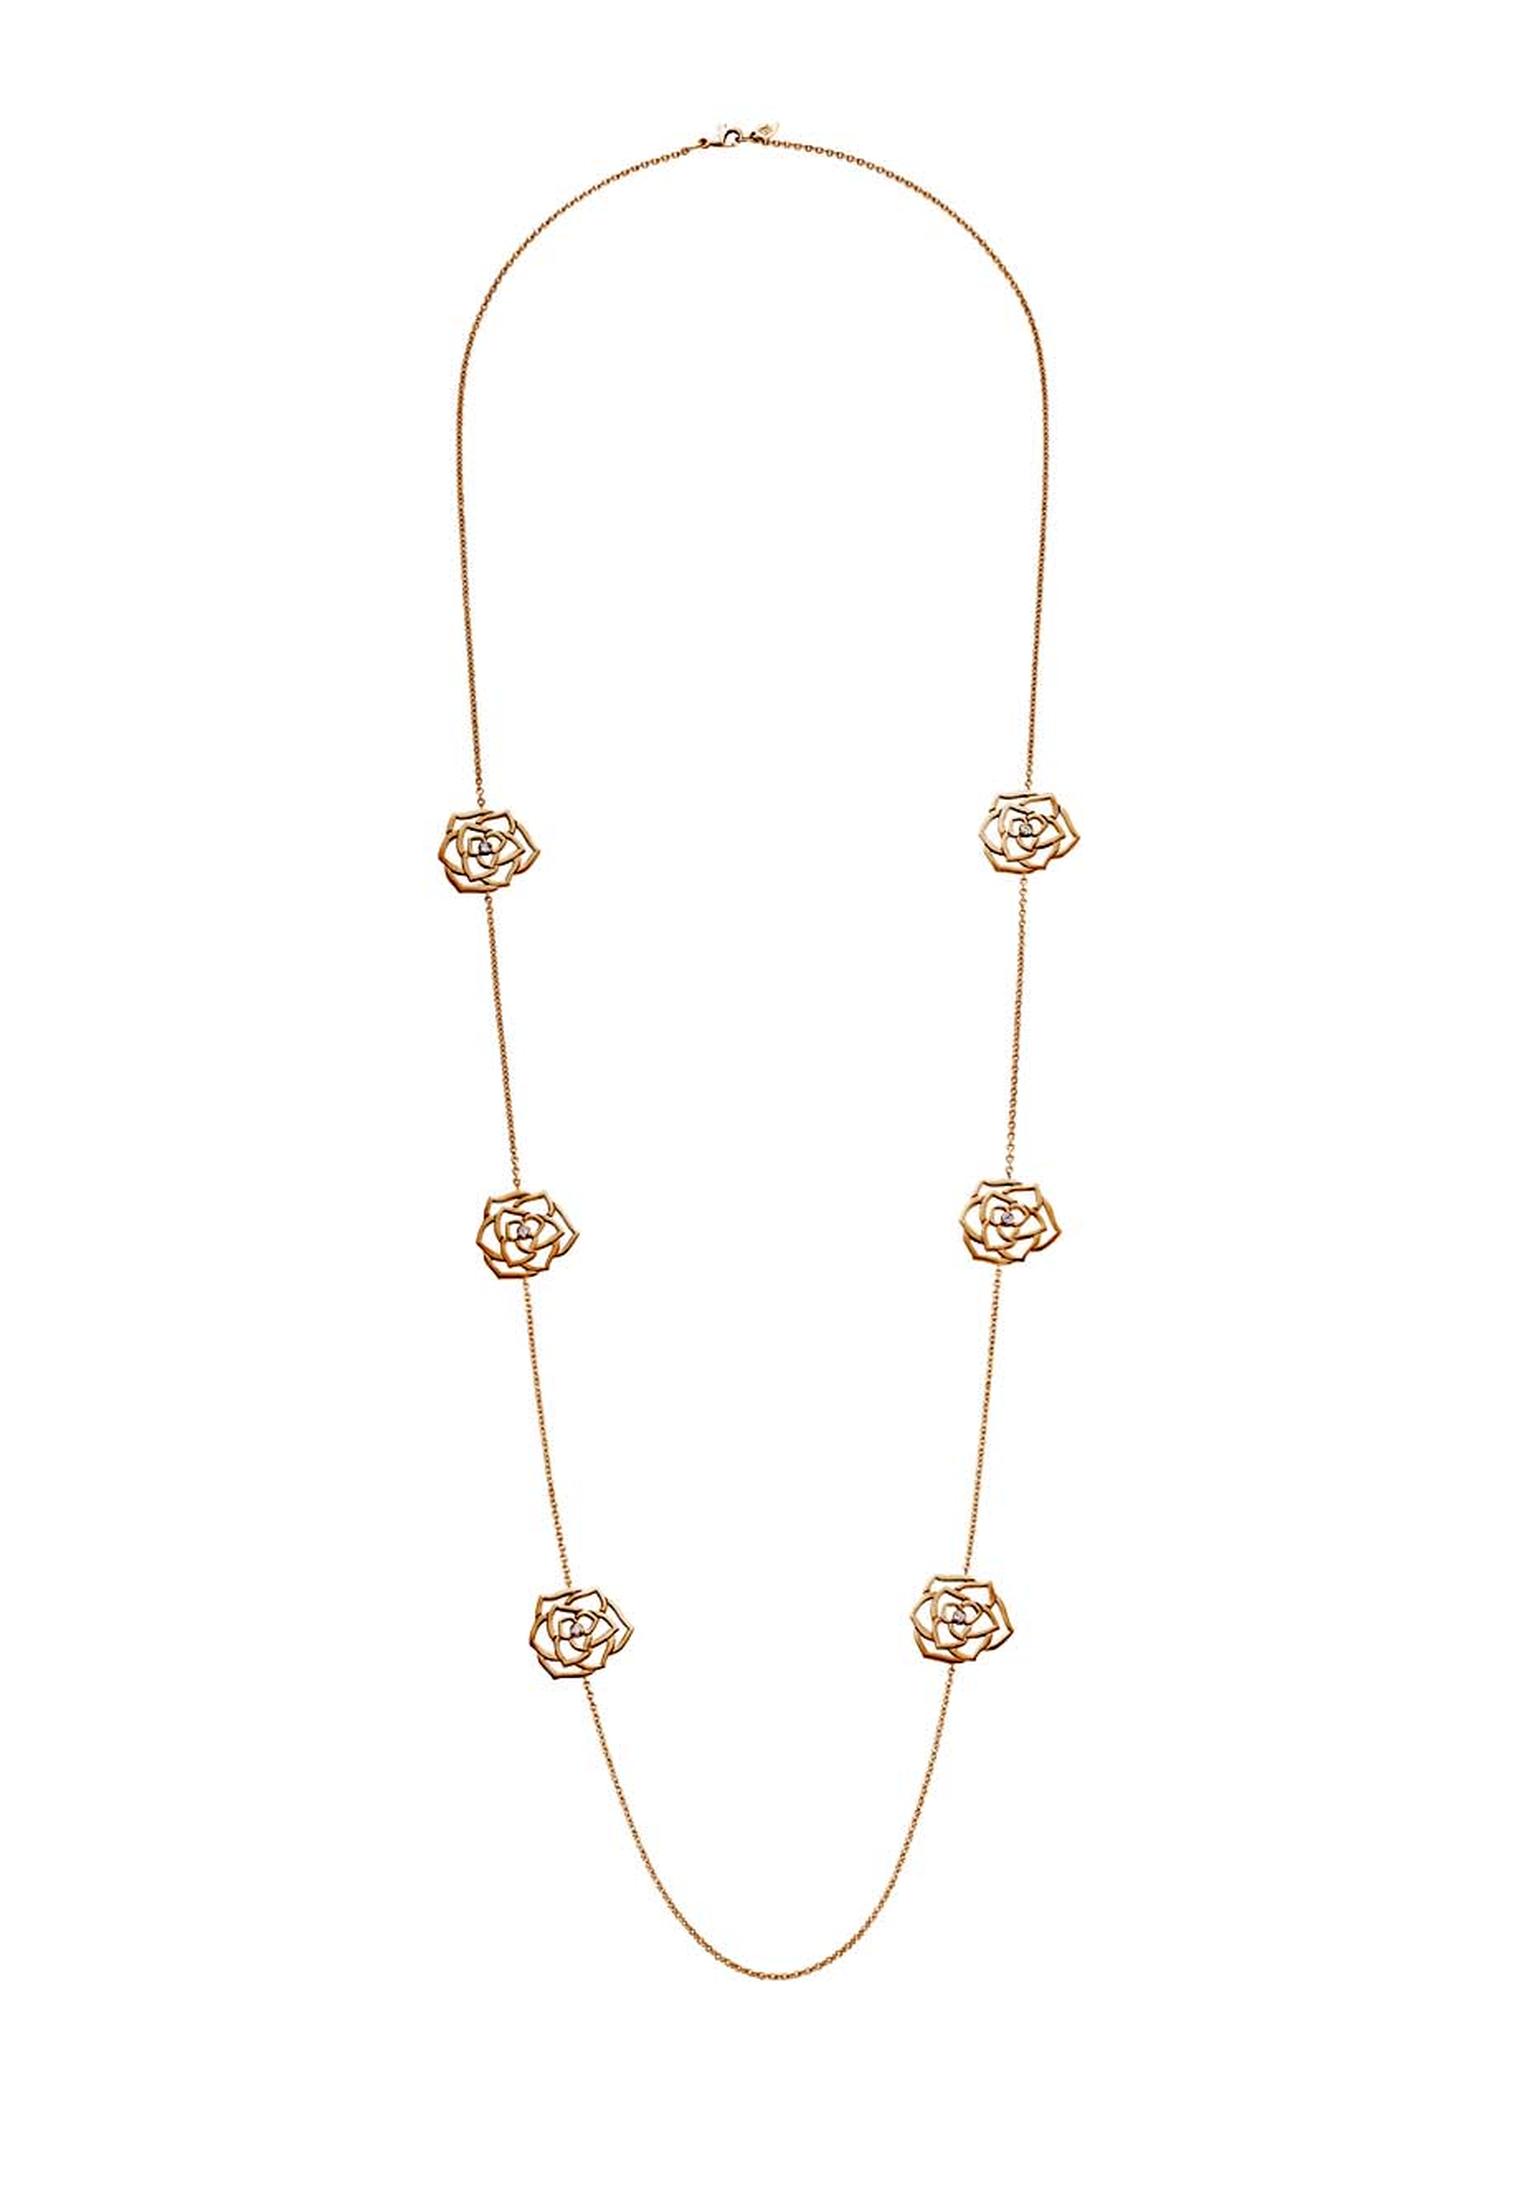 Piaget Rose necklace in rose gold. Measuring over a metre in length, it features six symmetrically placed roses with a diamond nestling in the centre of each (£6,600).